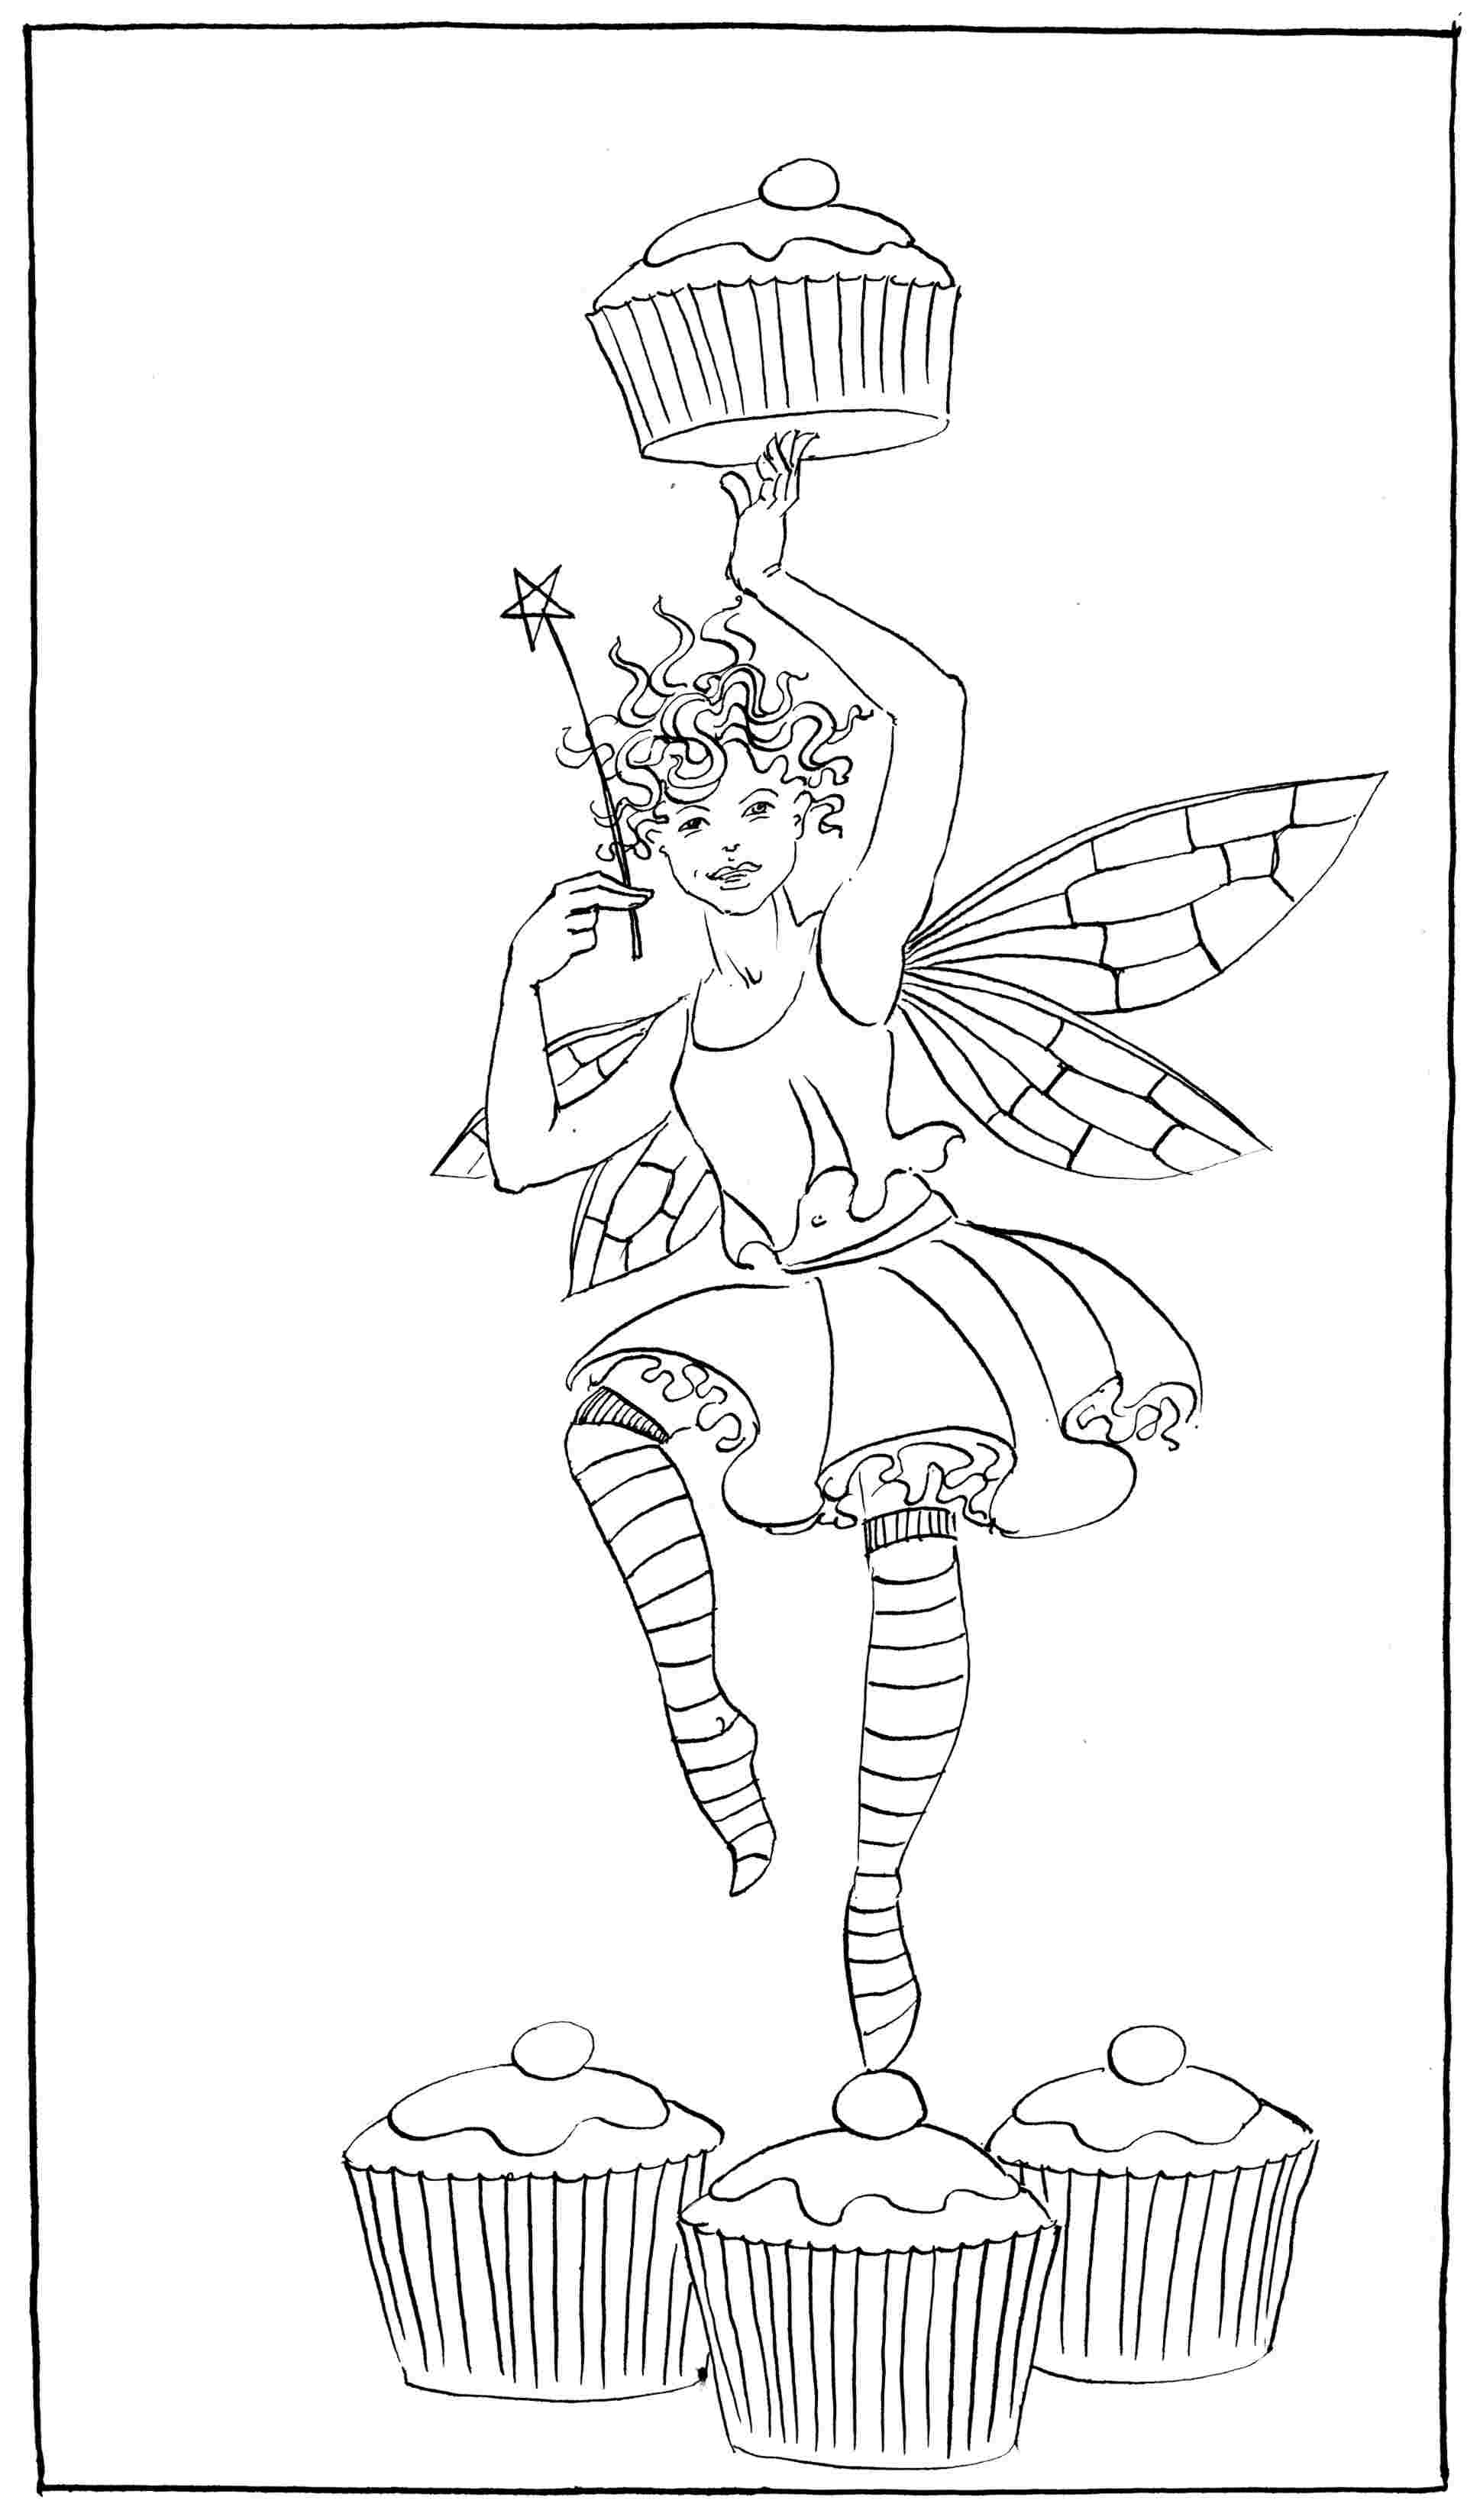 Cake Ballet - colouring-in drawing - to download, right click and save, print out and colour in!